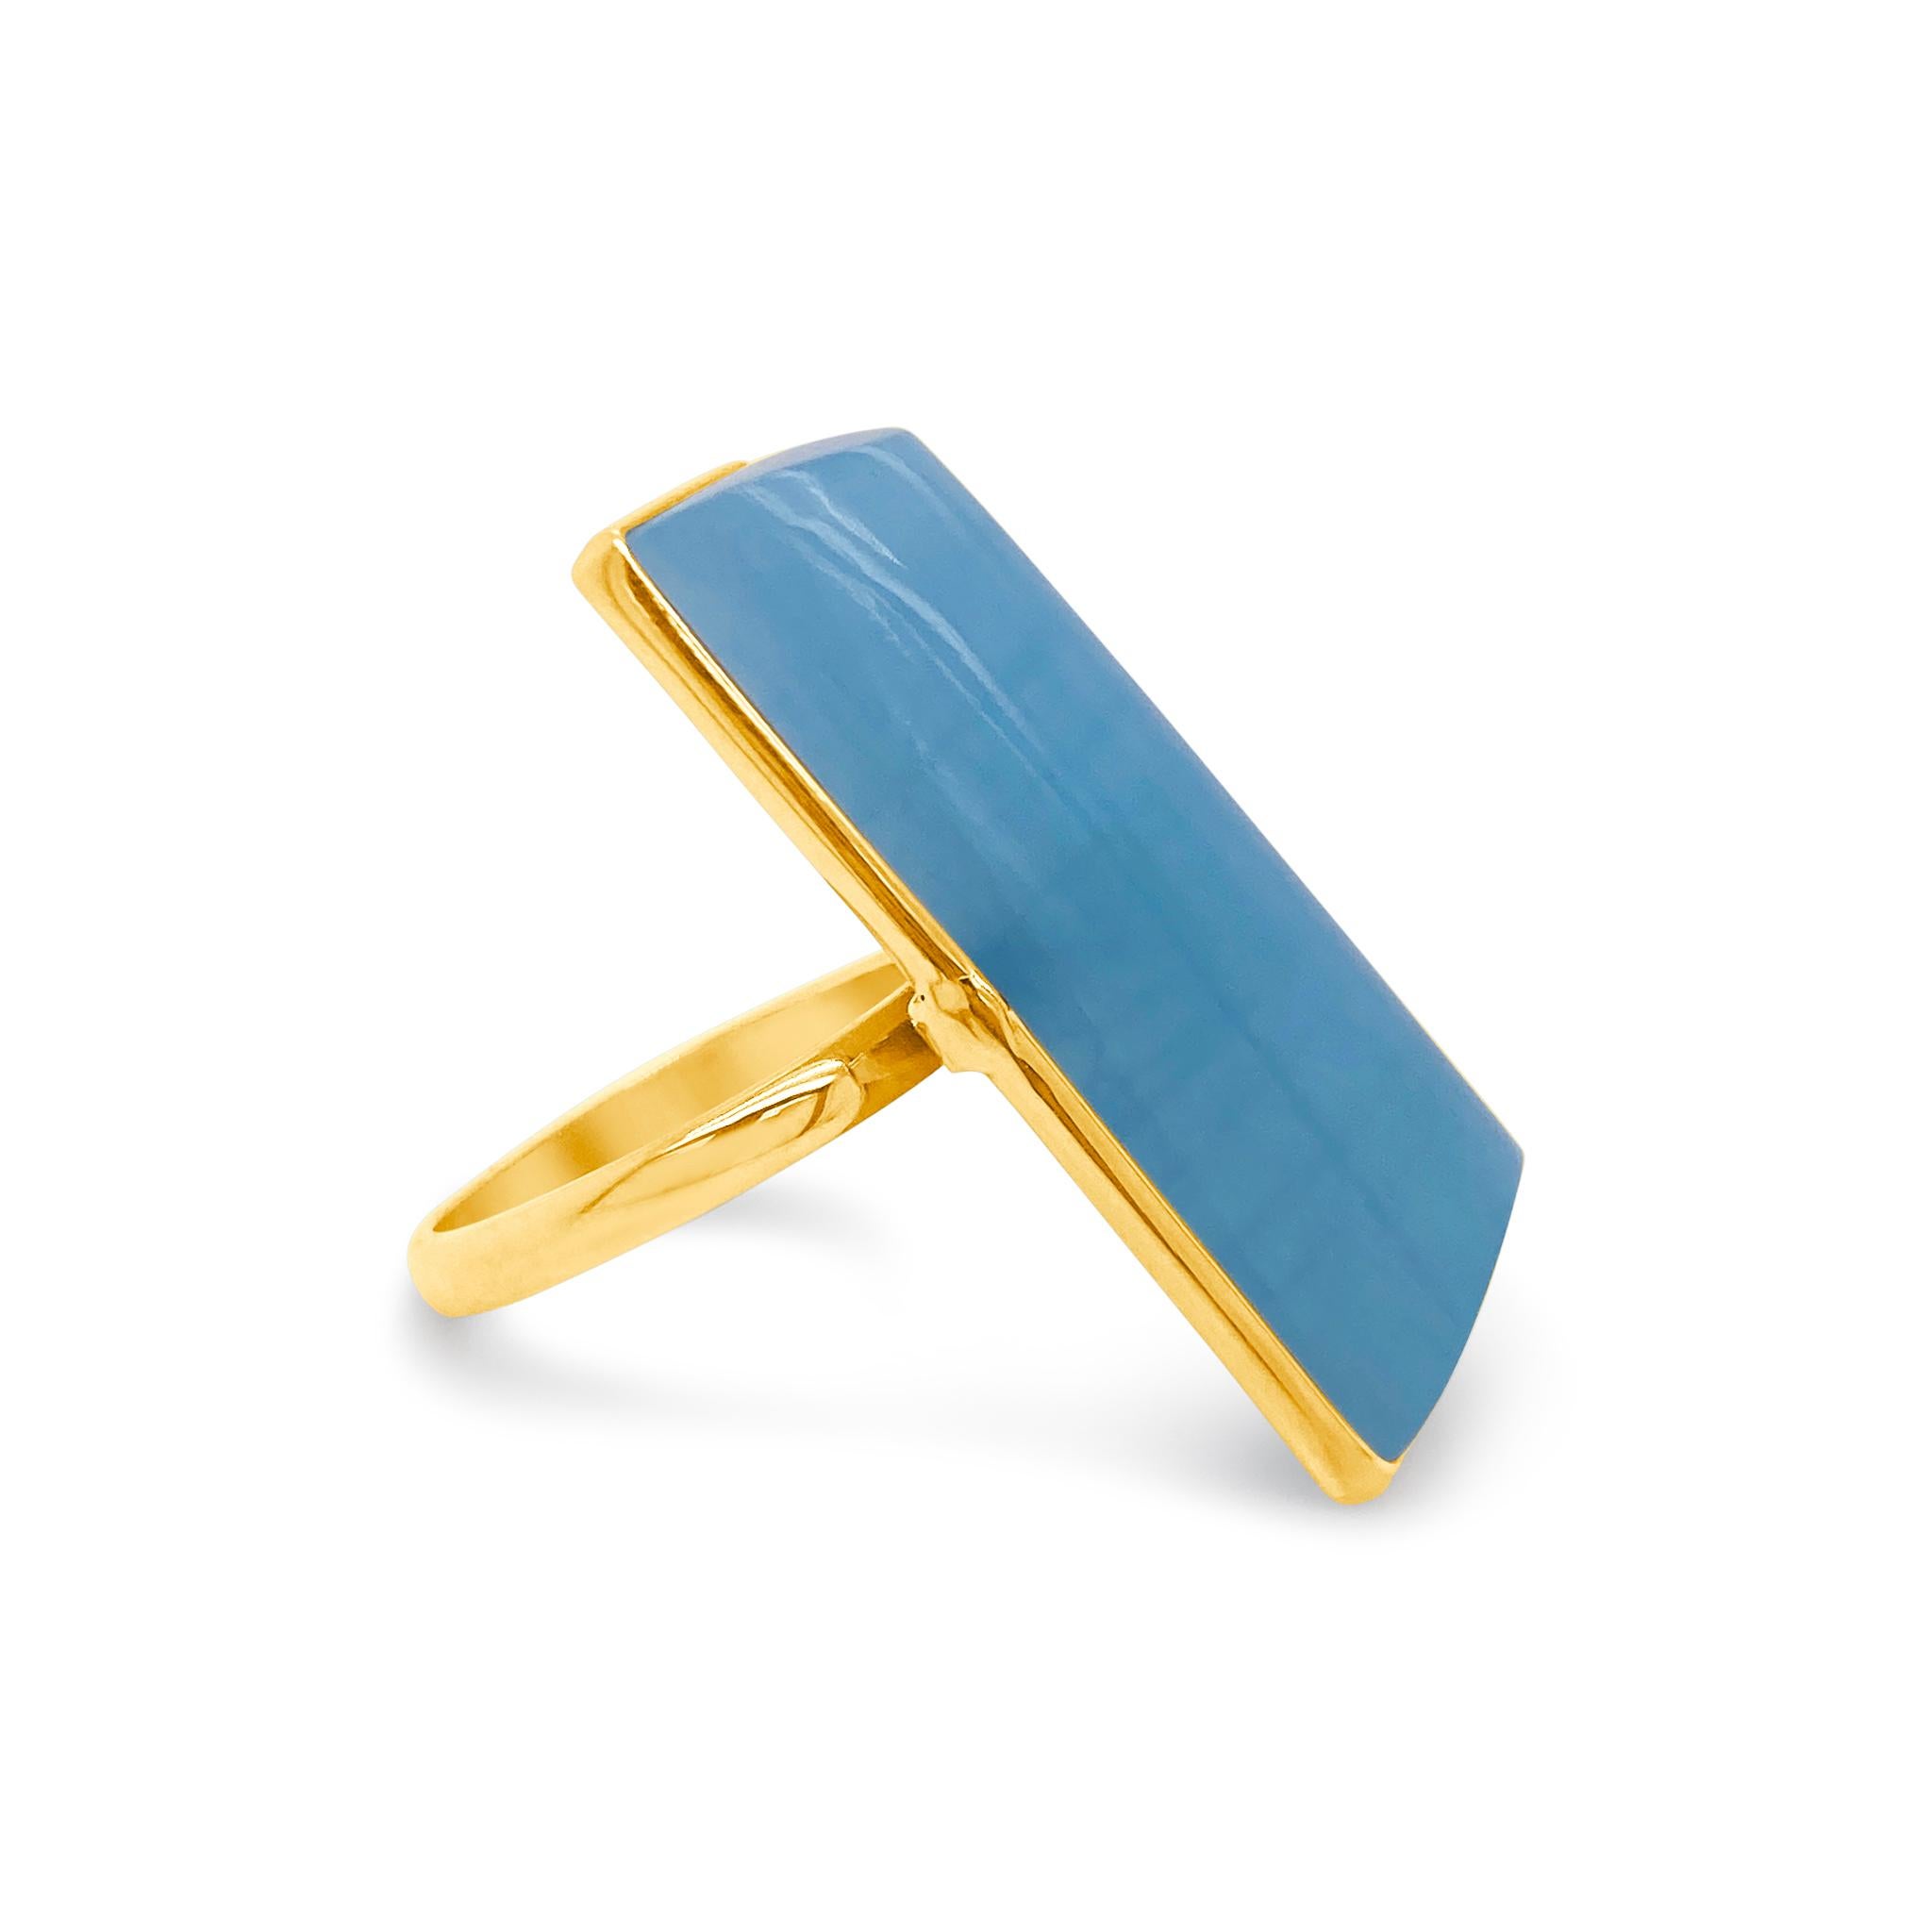 Tresor Beautiful Ring feature 39.65 total carats of Aquamarine. The Ring are an ode to the luxurious yet classic beauty with sparkly gemstones and feminine hues. Their contemporary and modern design make them perfect and versatile to be worn at any